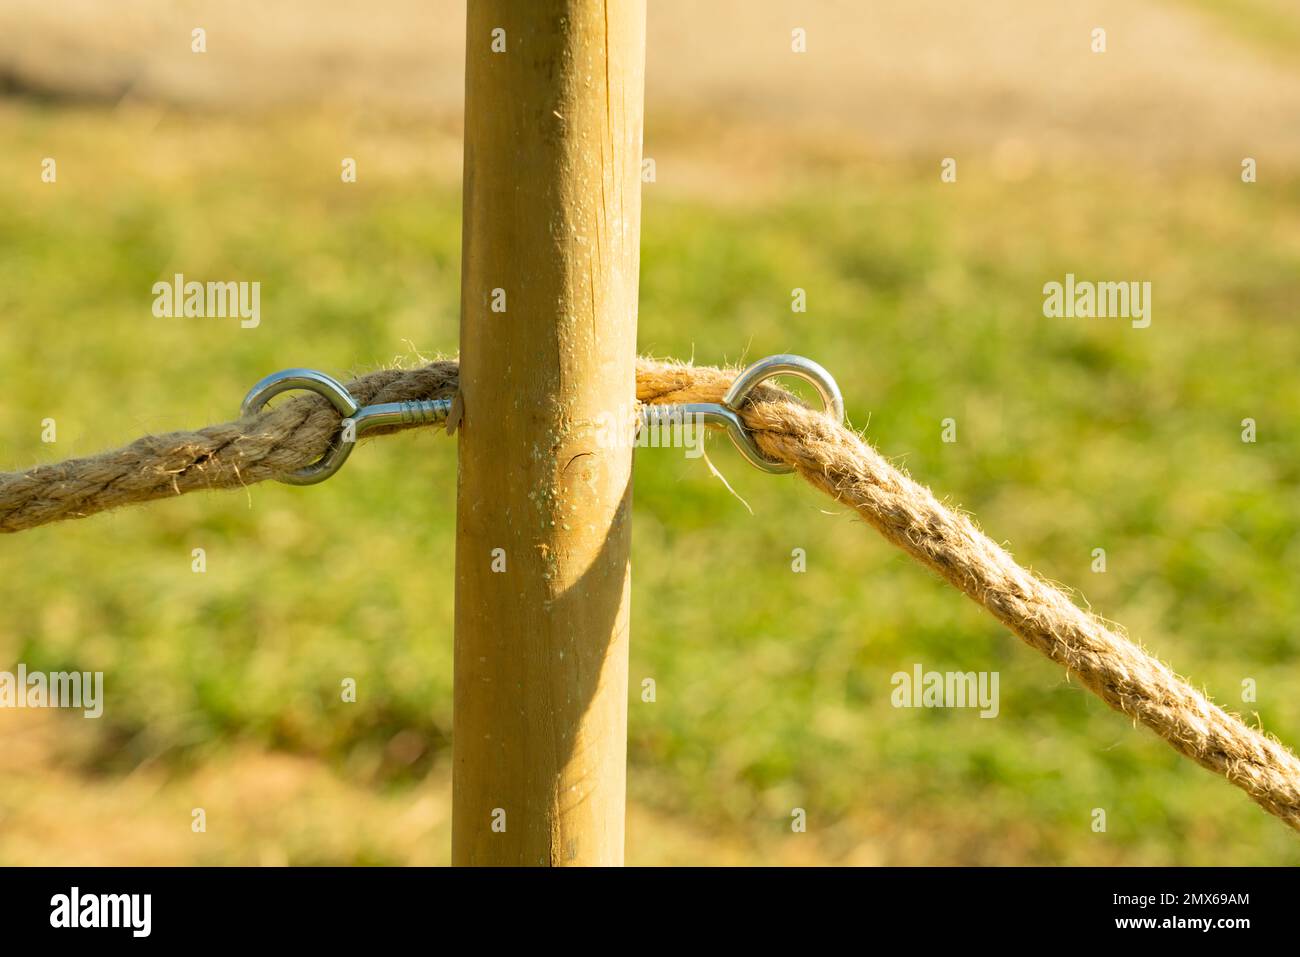 Close-up of wooden pole for delimitation with rope in outdoor nature stress-free relaxing park as leisure peaceful countryside travel concept Stock Photo